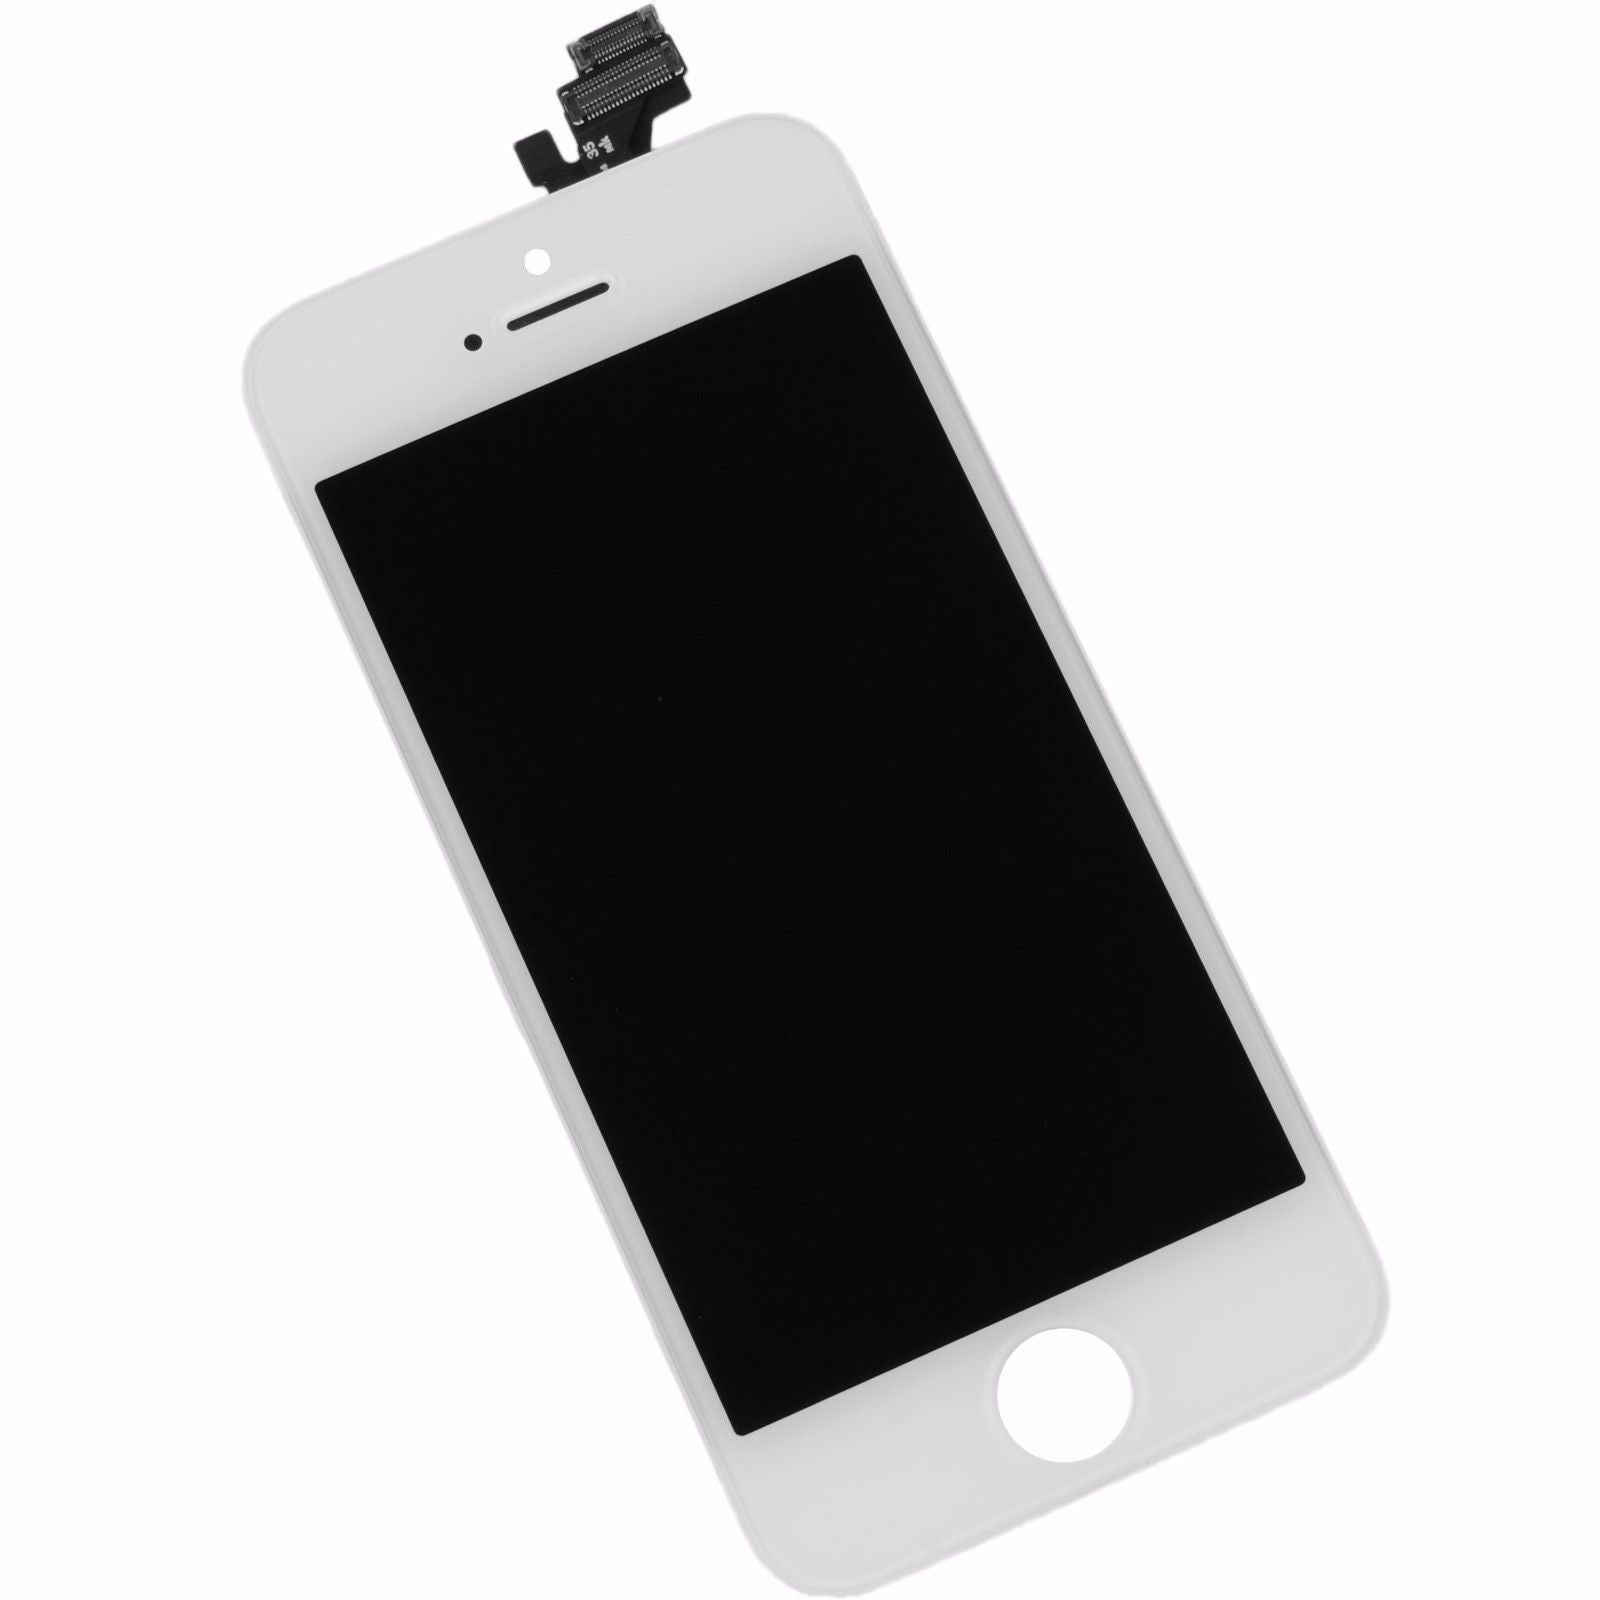 Apple iPhone 5 5G Replacement LCD Touch Screen Assembly - White for [product_price] - First Help Tech